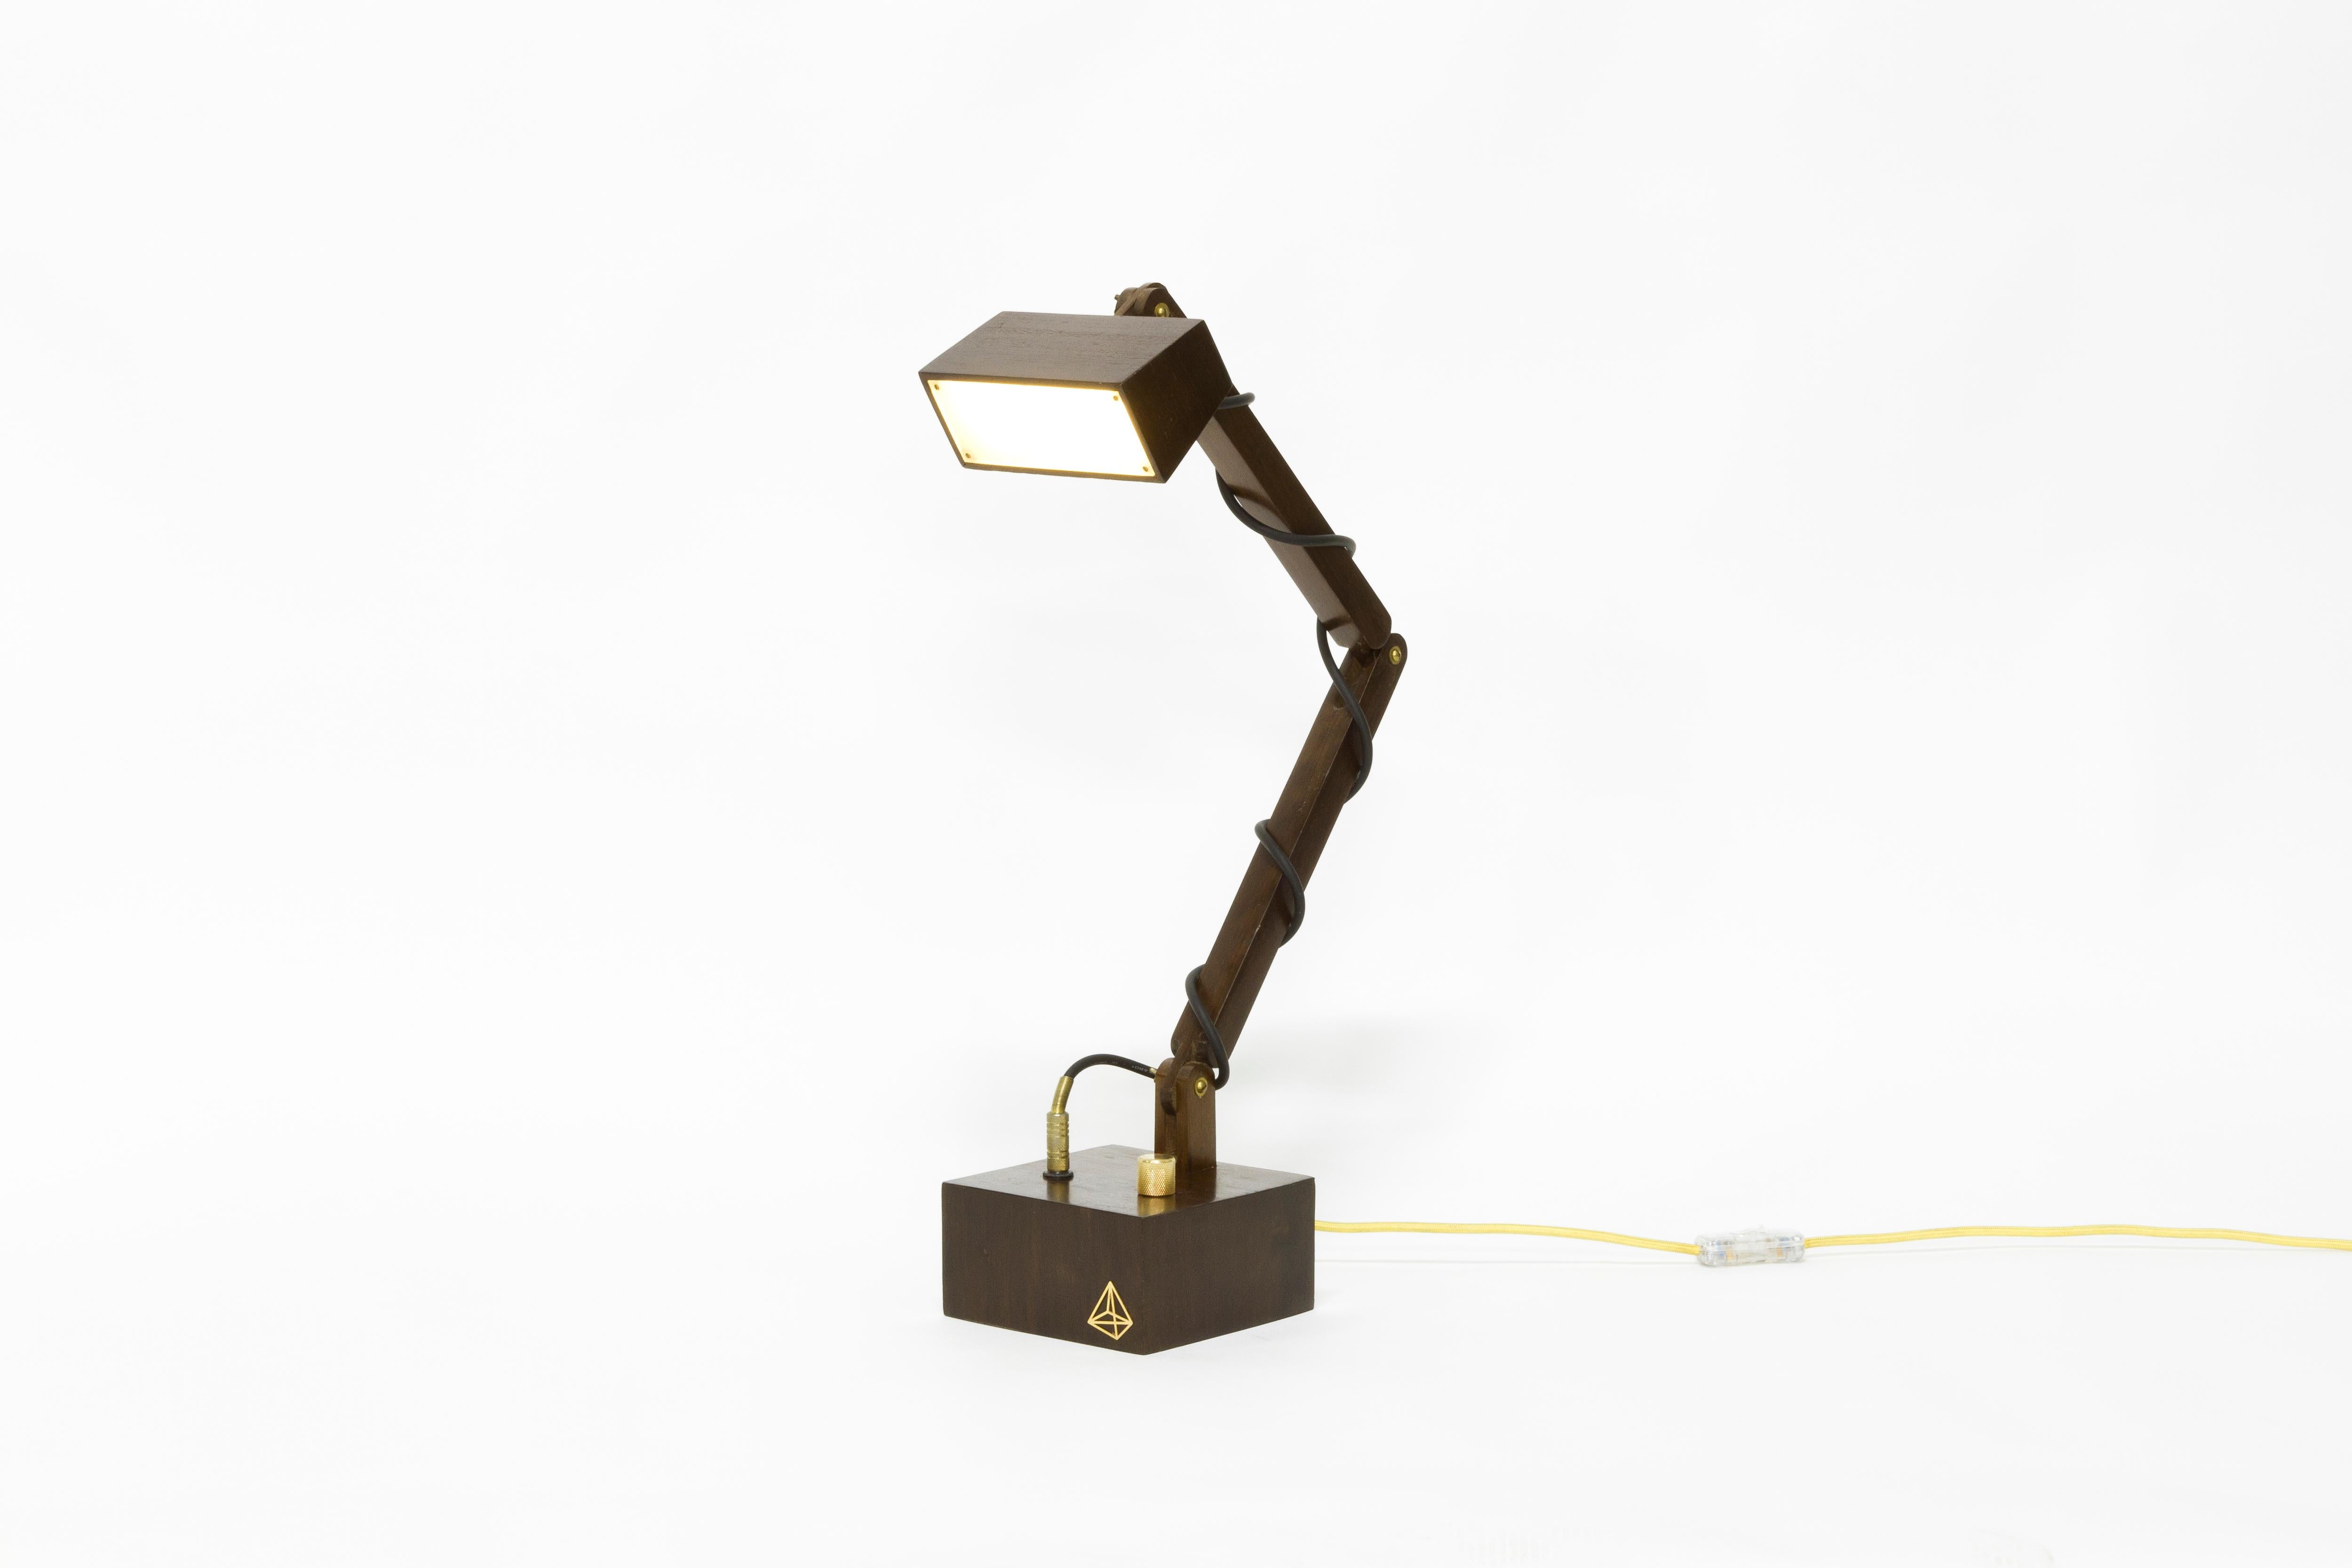 Brazilian Table Lamp in Dark Wood, Limited Edition Contemporary Design by O Formigueiro For Sale